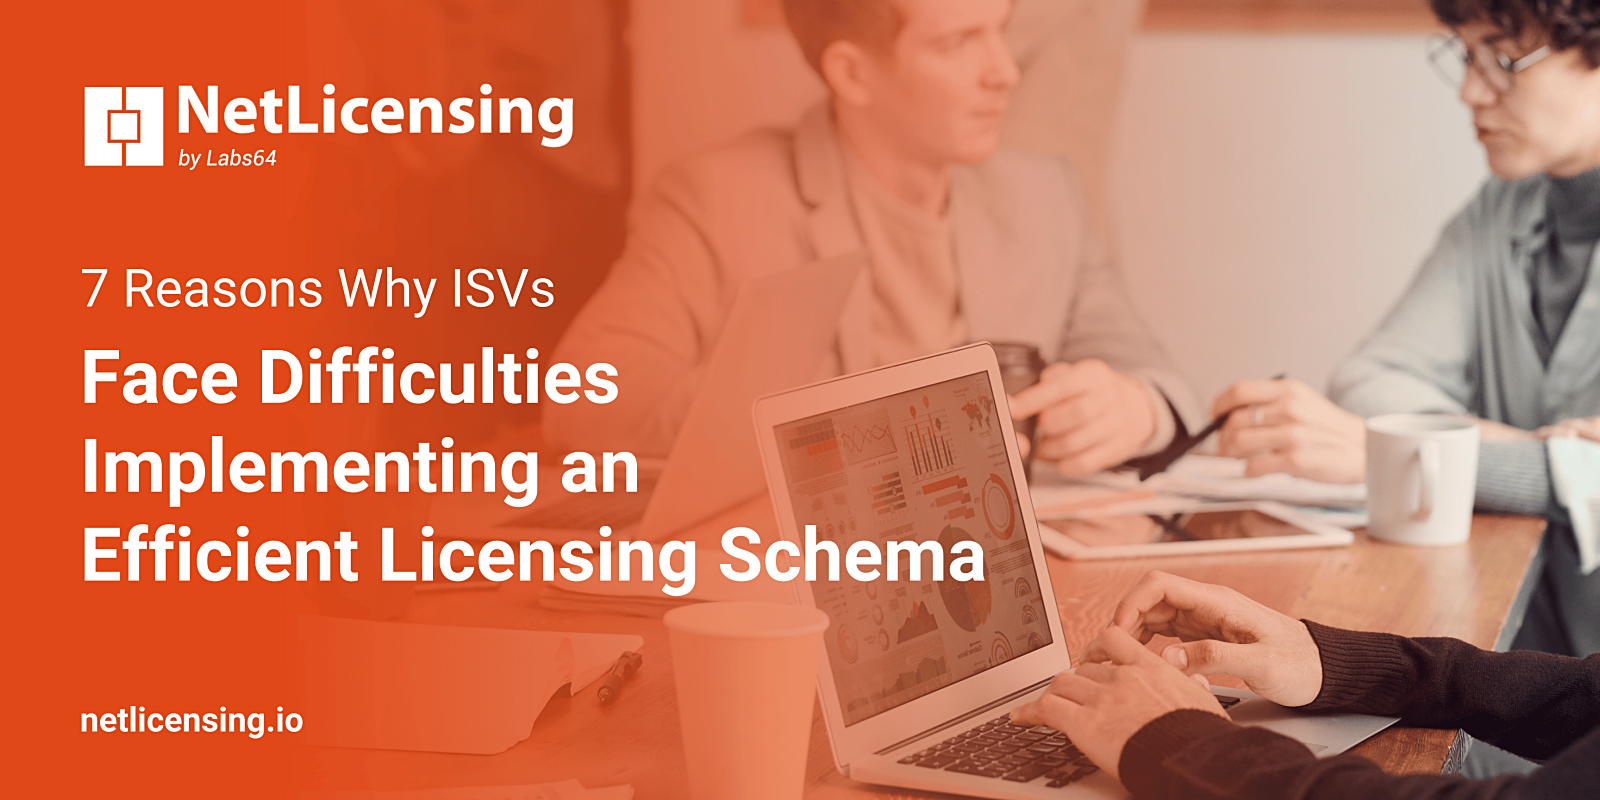 7 Reasons Why ISVs Face Difficulties Implementing an Efficient Licensing Schema